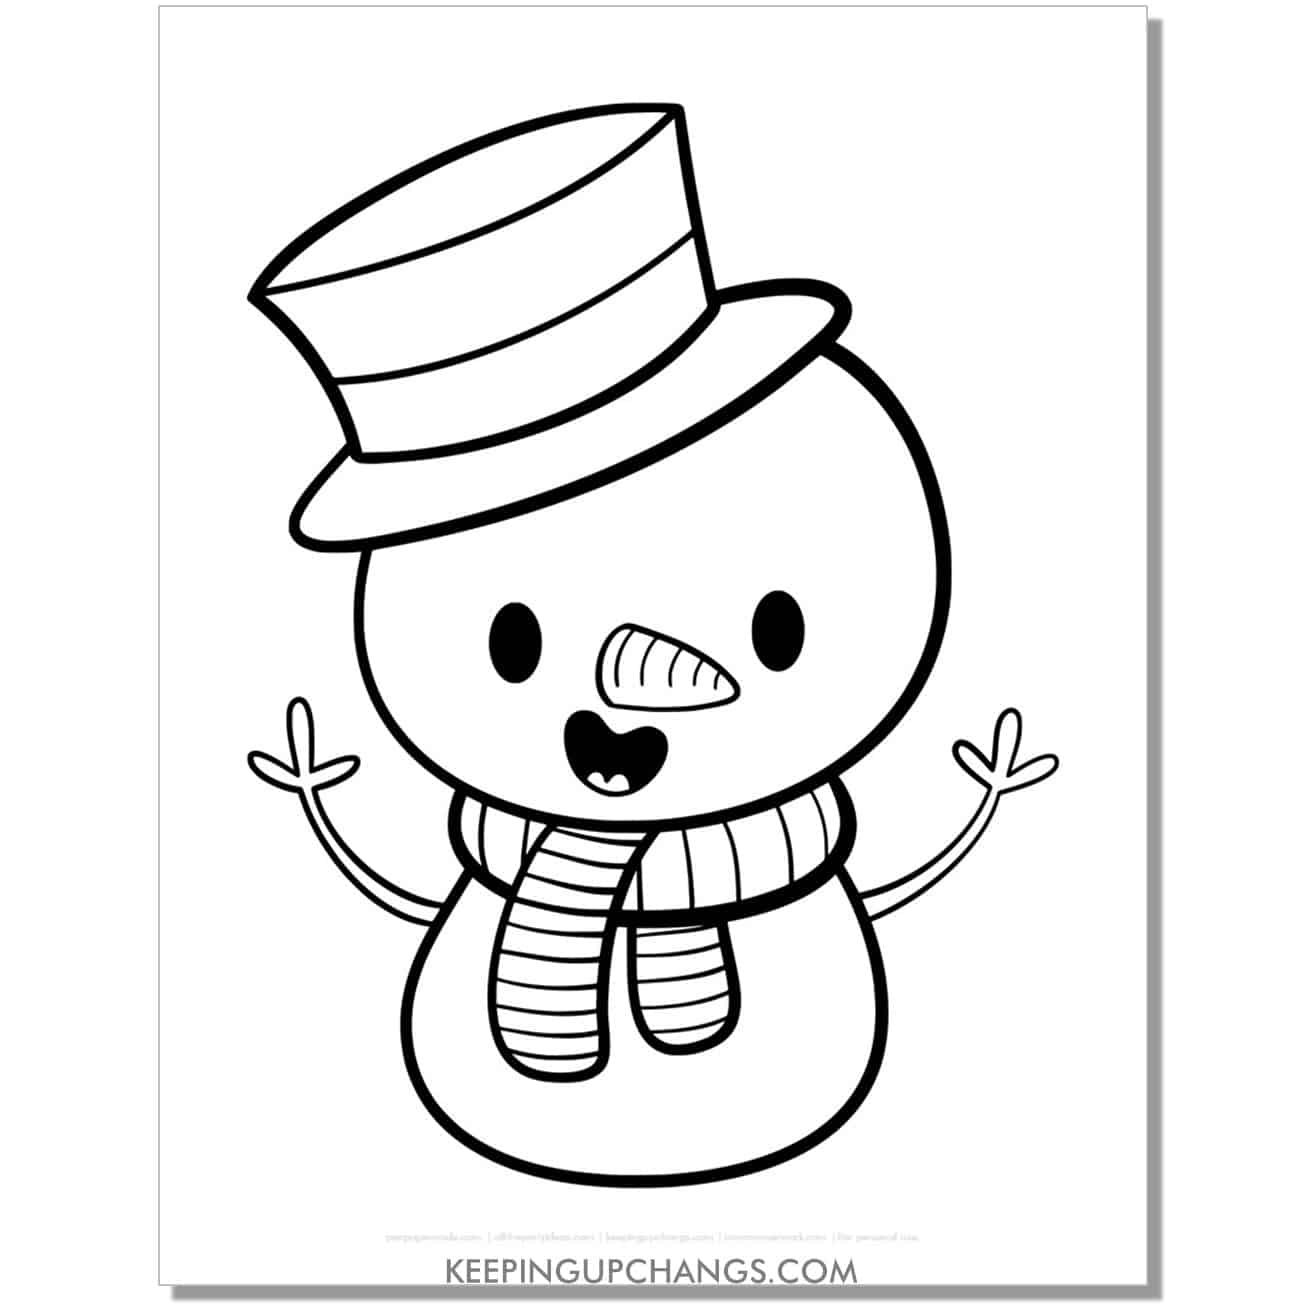 free cute snowman coloring page for toddlers, preschool, kindergarten.